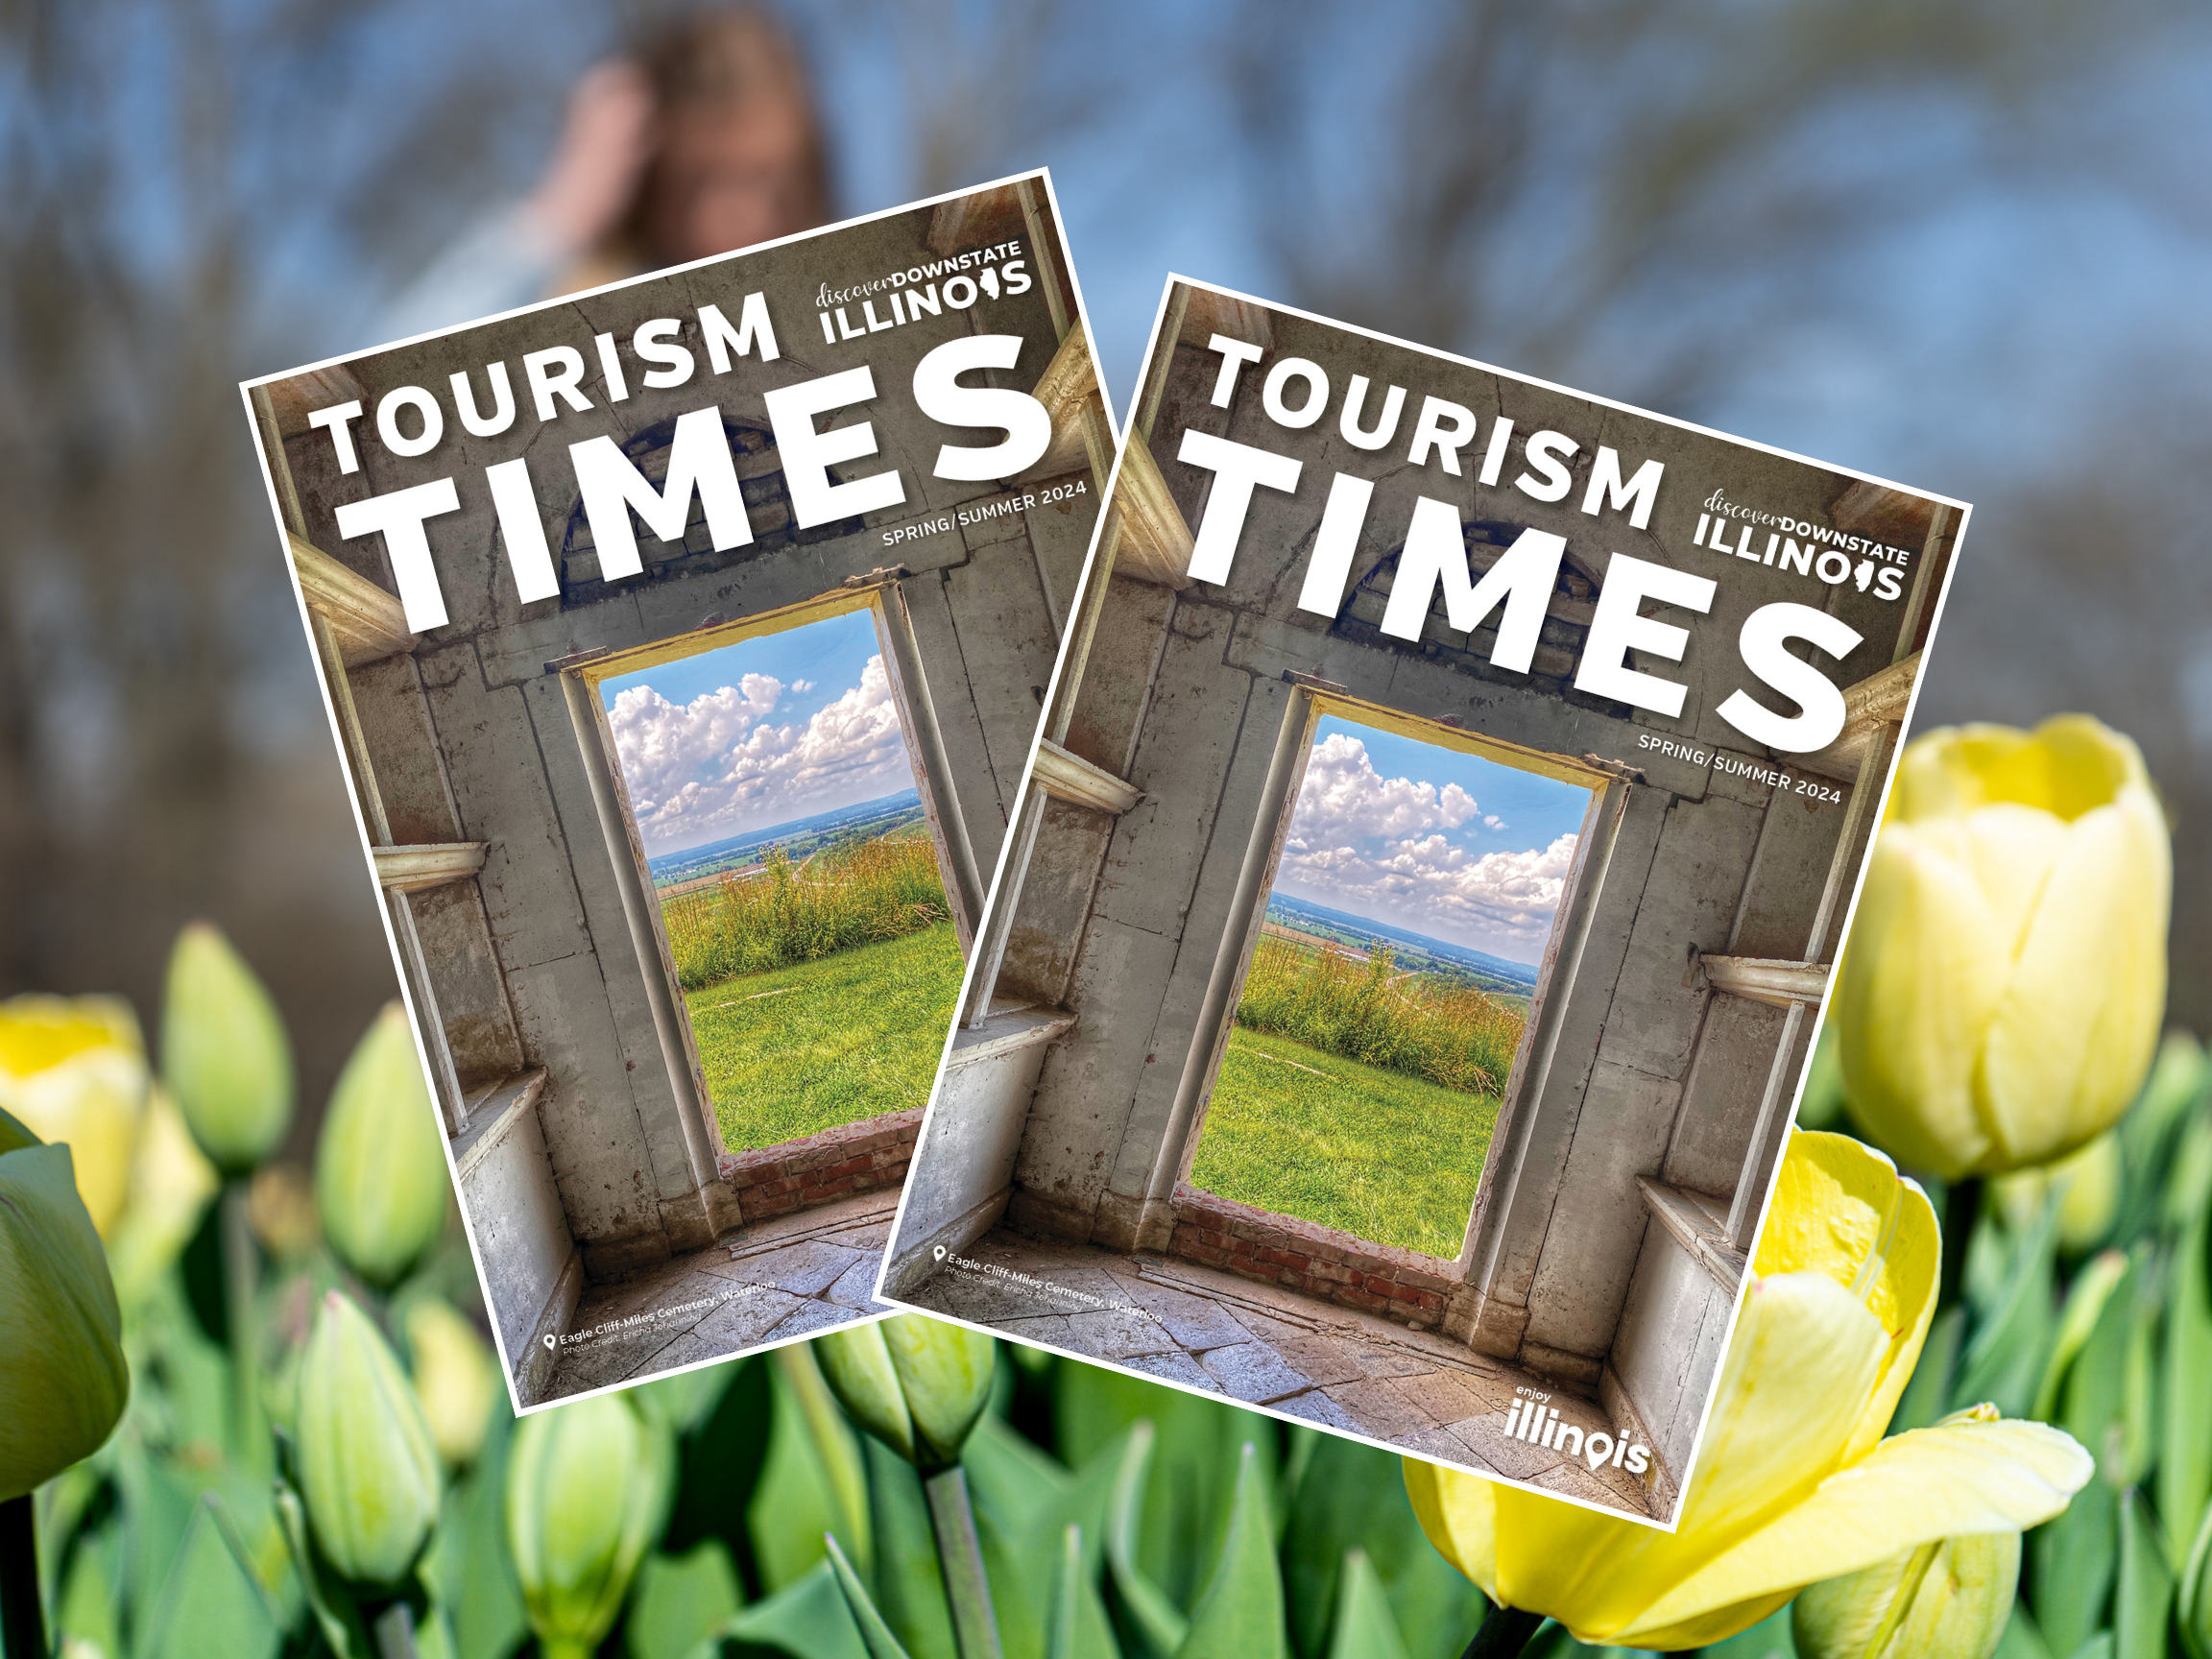 About the Tourism Times